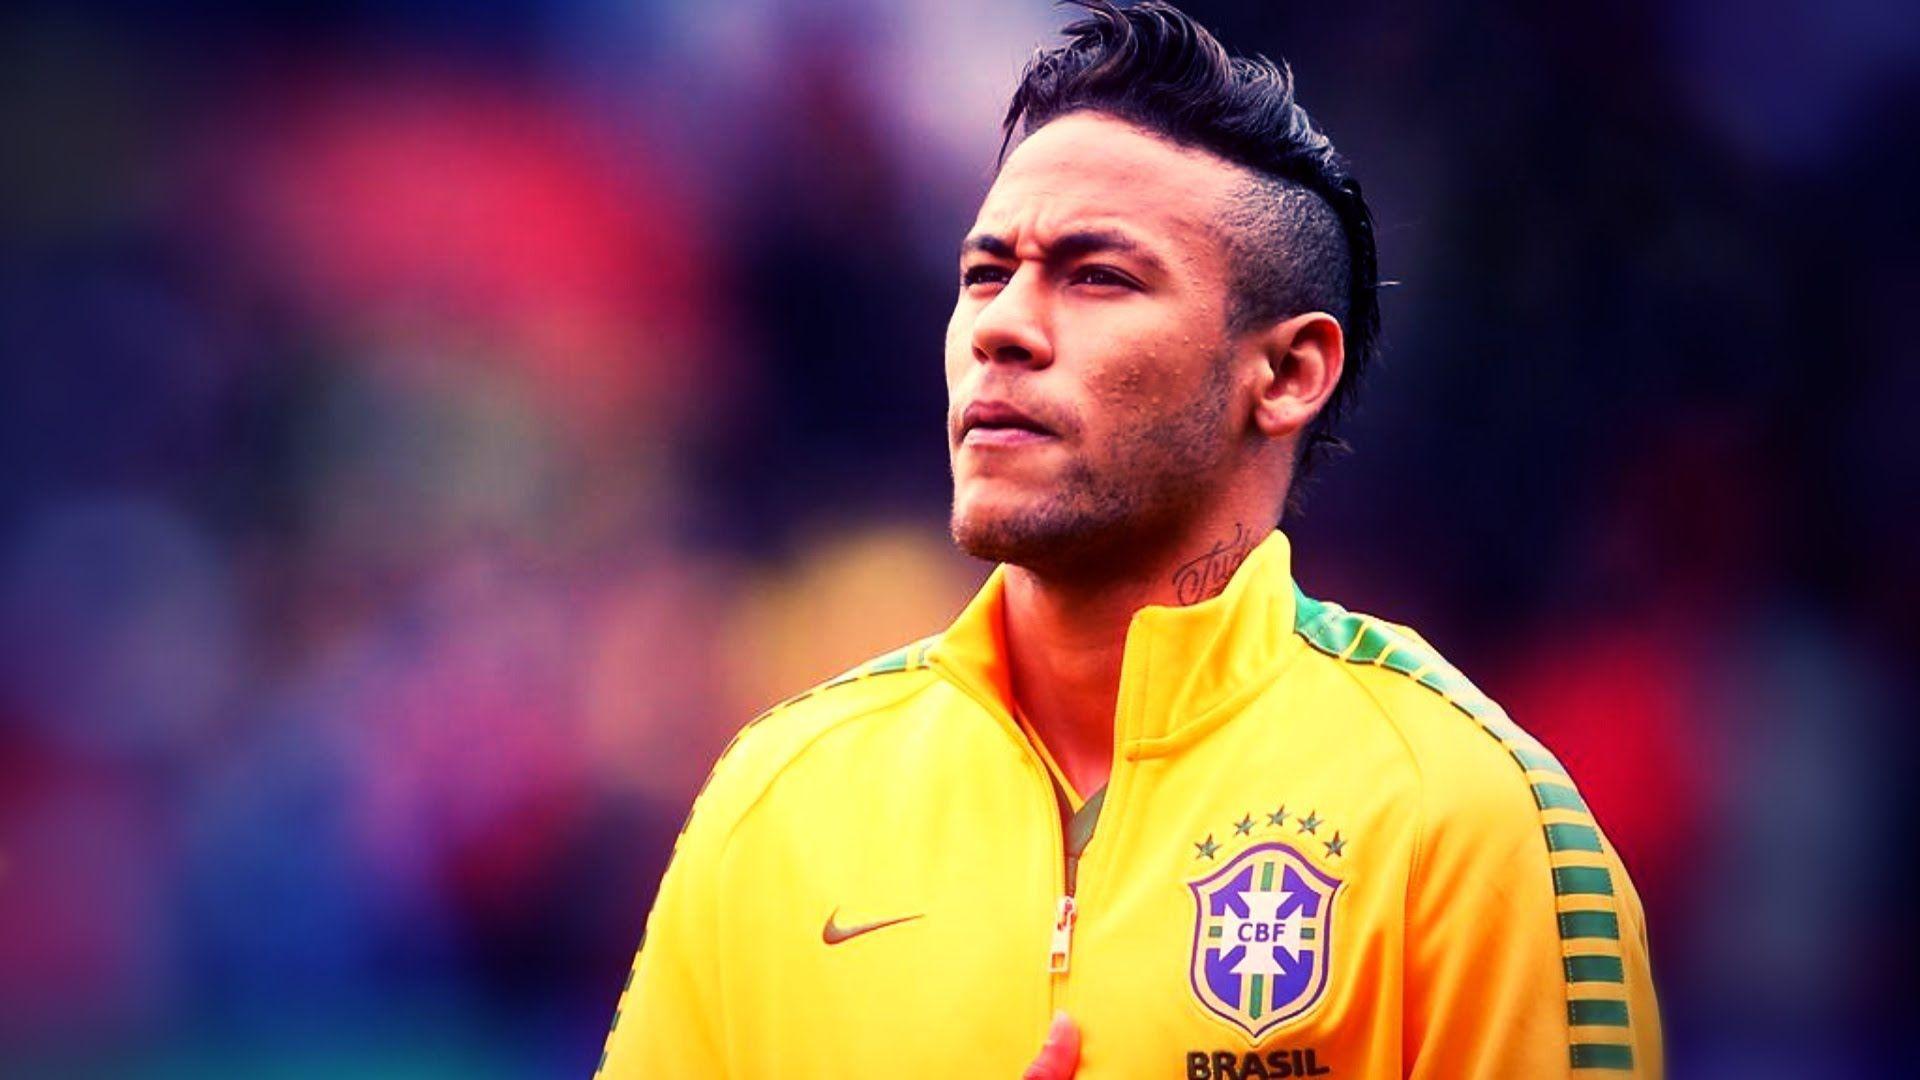 Neymar Jr Hd Photos Psg - Neymar JR PSG Wallpapers - Wallpaper Cave / A desktop wallpaper is highly customizable, and you can give yours a personal touch by adding your images (including your photos from a camera) or download beautiful pictures from the.